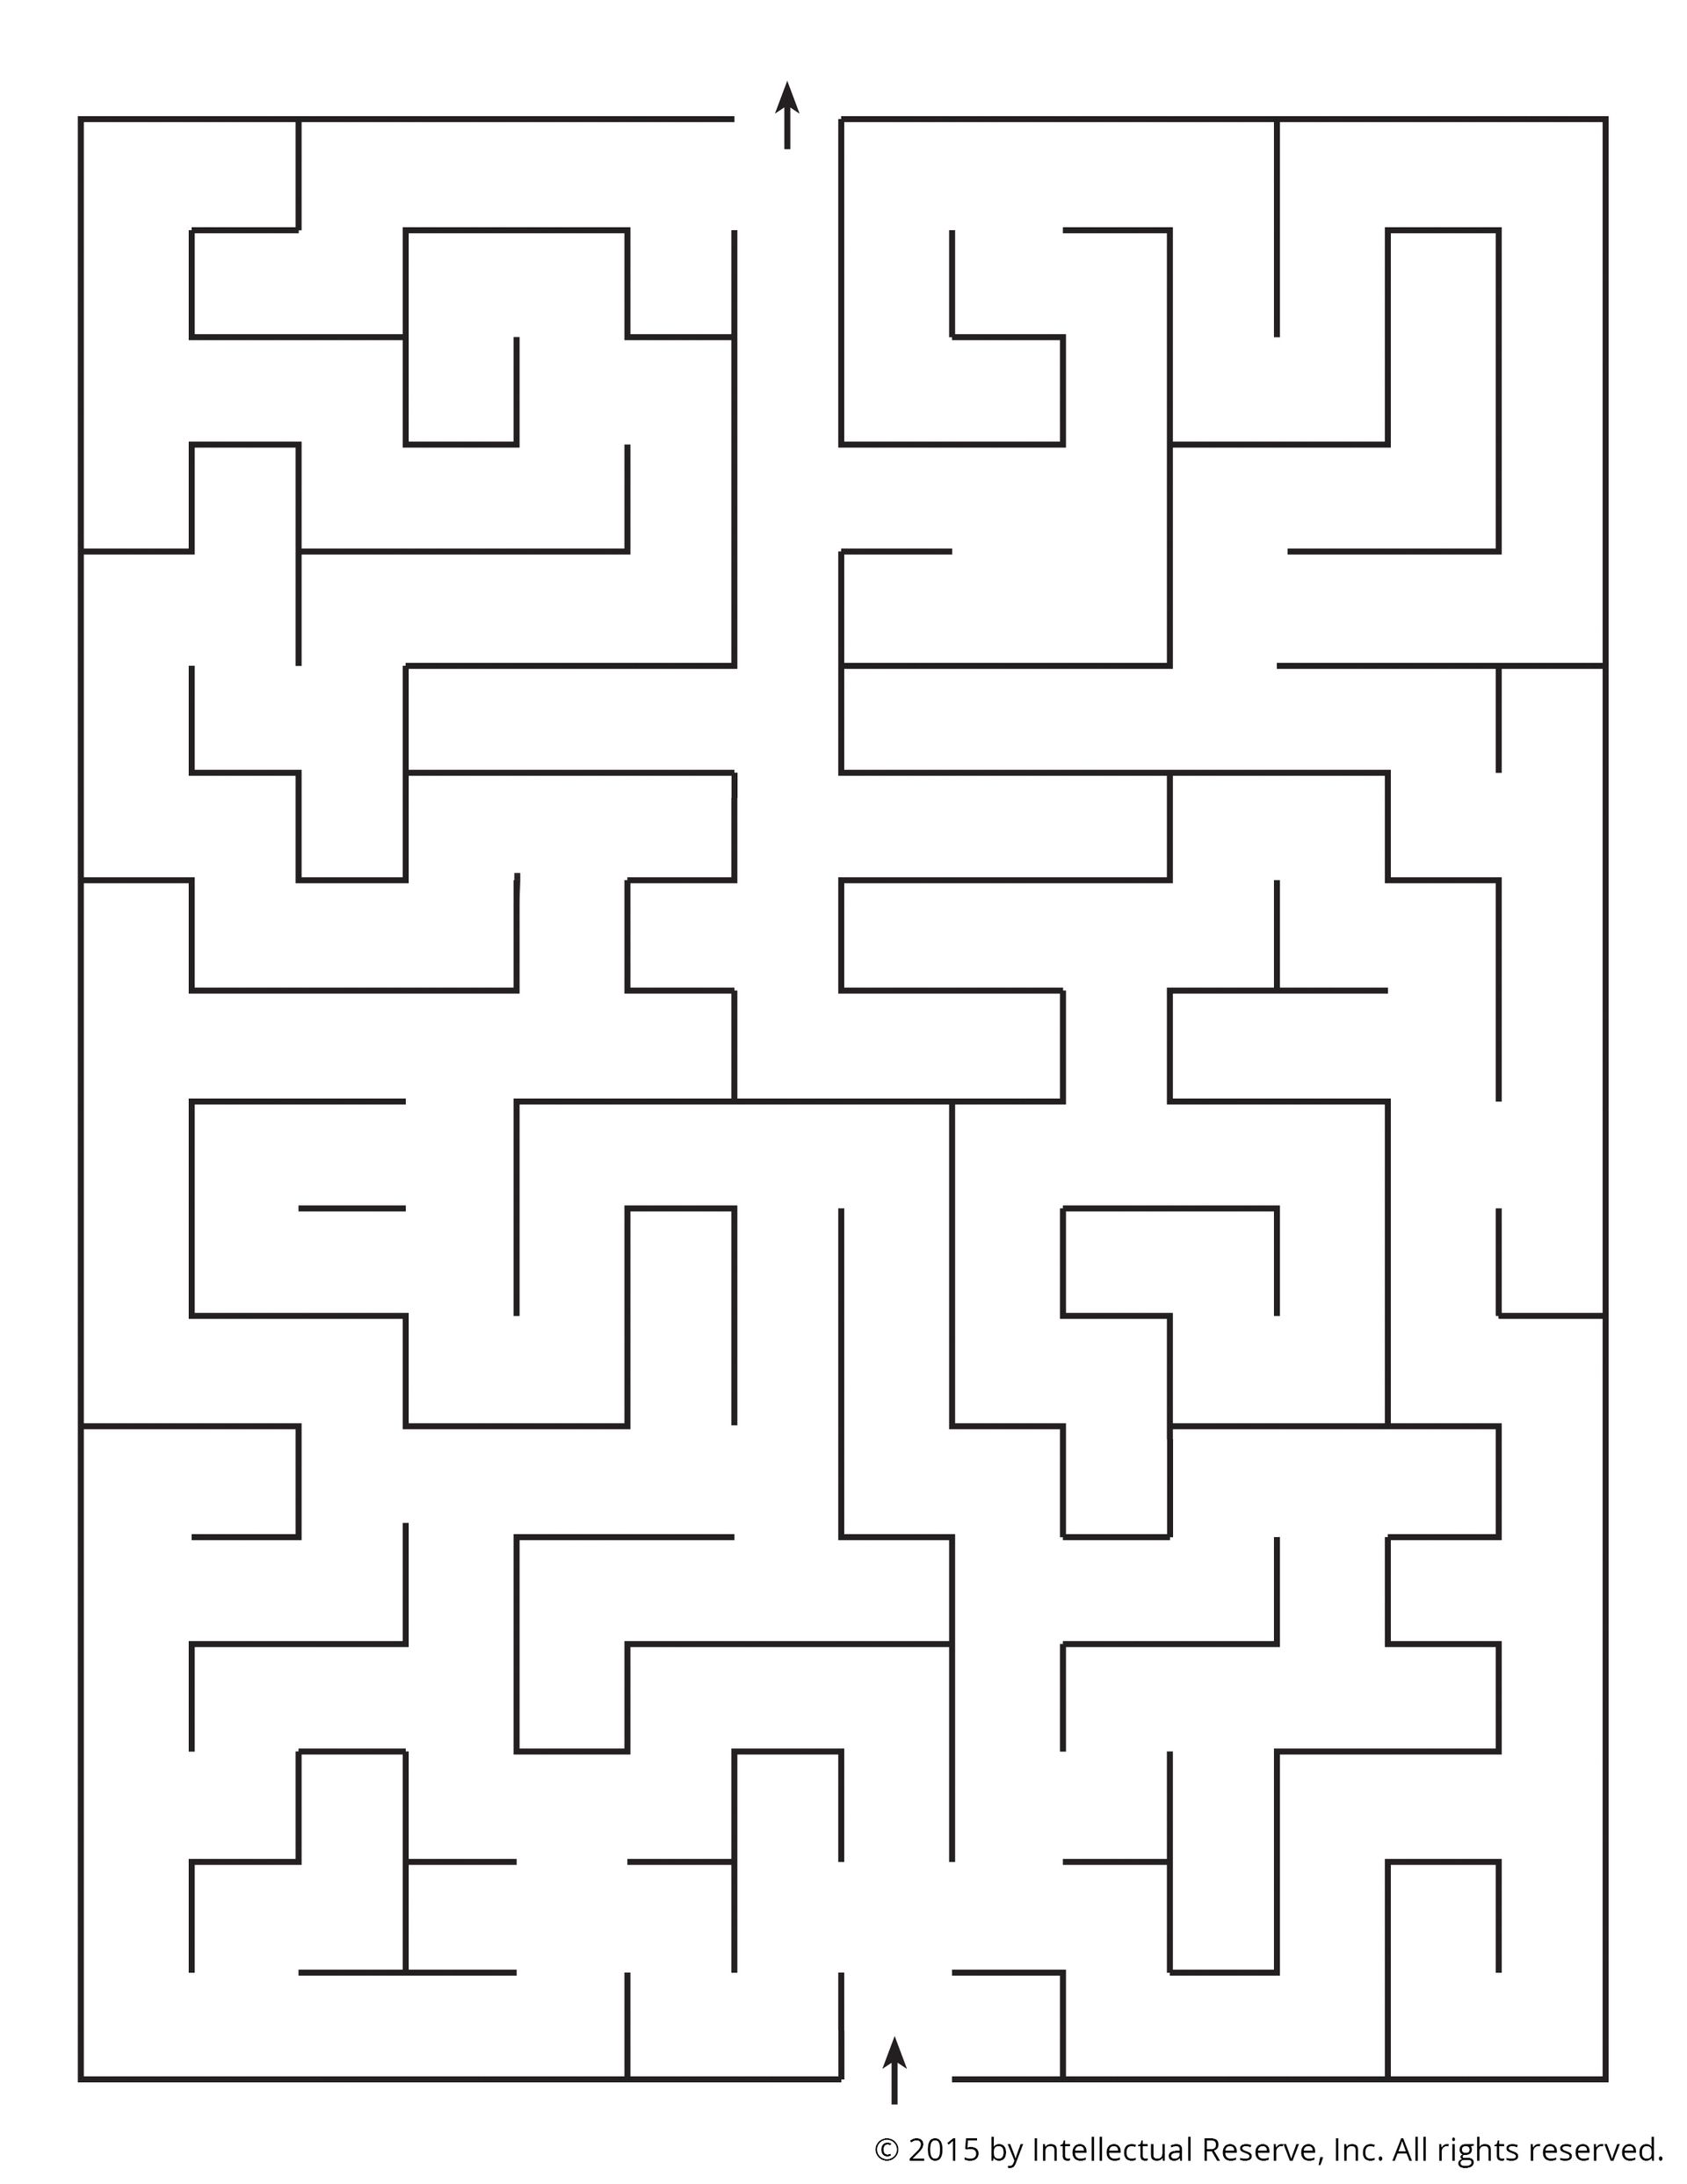 A simple line maze starting at the bottom and ending at the top.